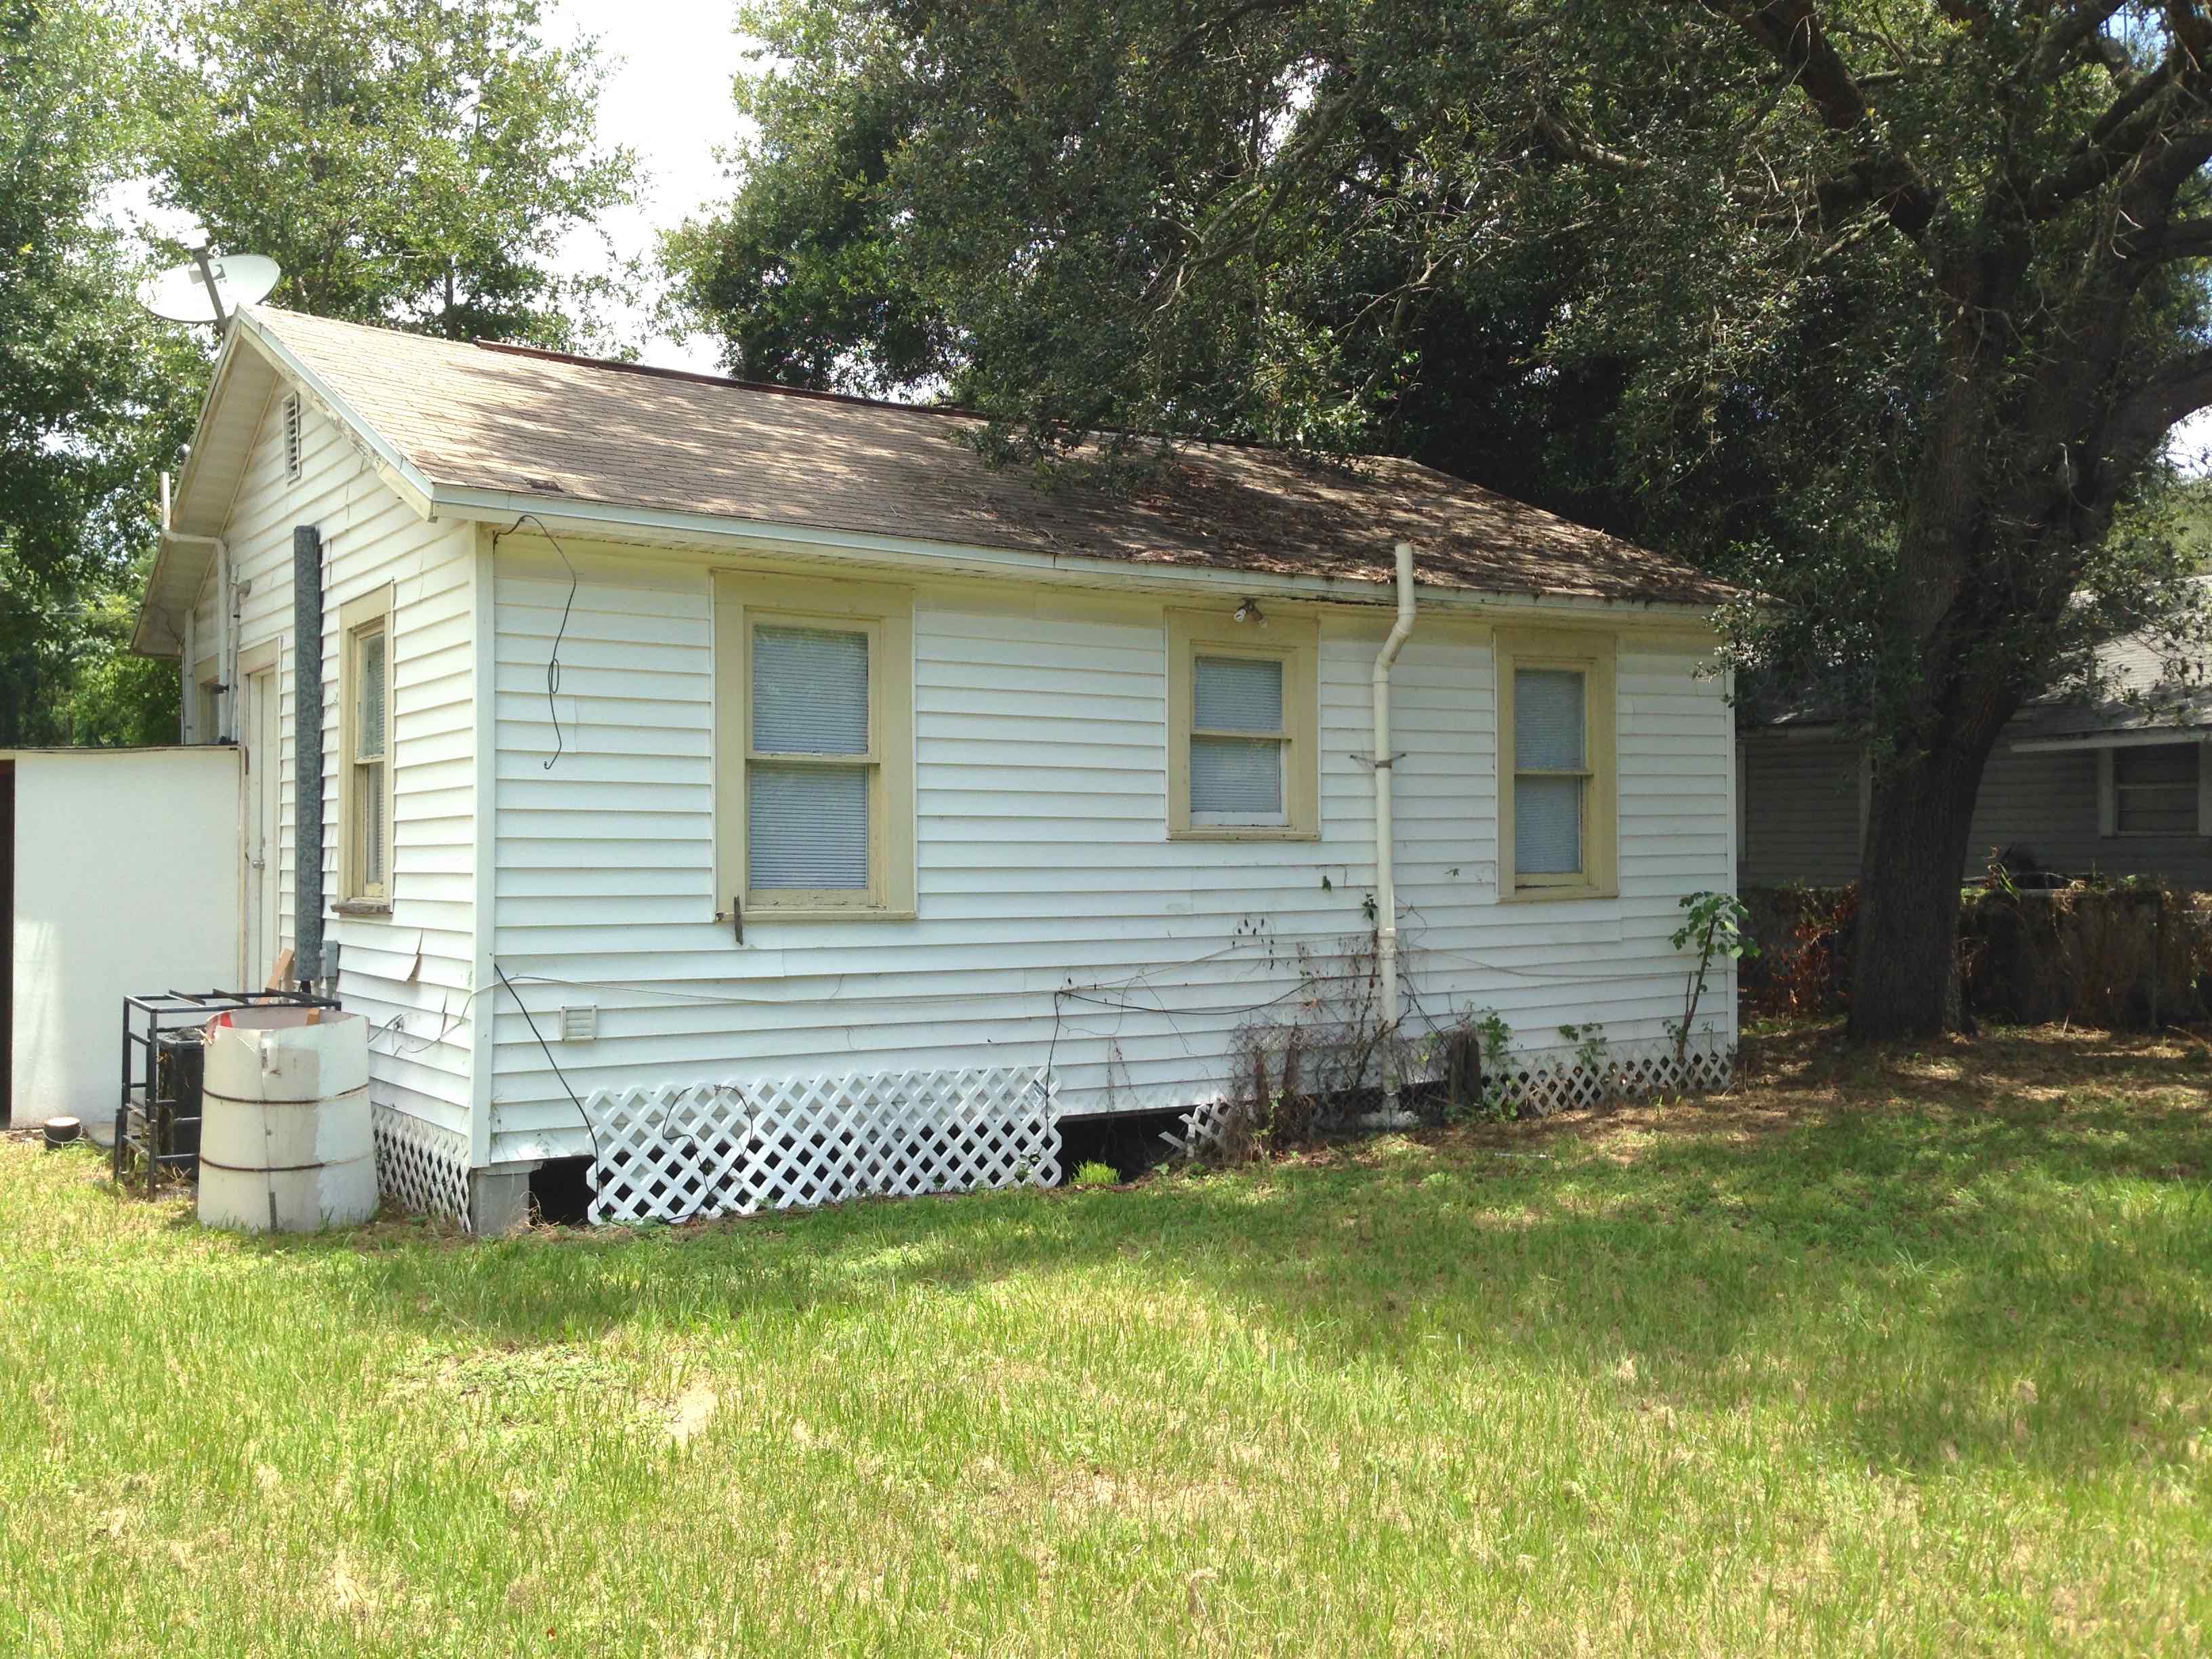 2 Bedrooms, Single Family, Rental For sale, Ellicott, 1 Bathrooms, Listing ID undefined, Tamp, Florida, United States, 33610,